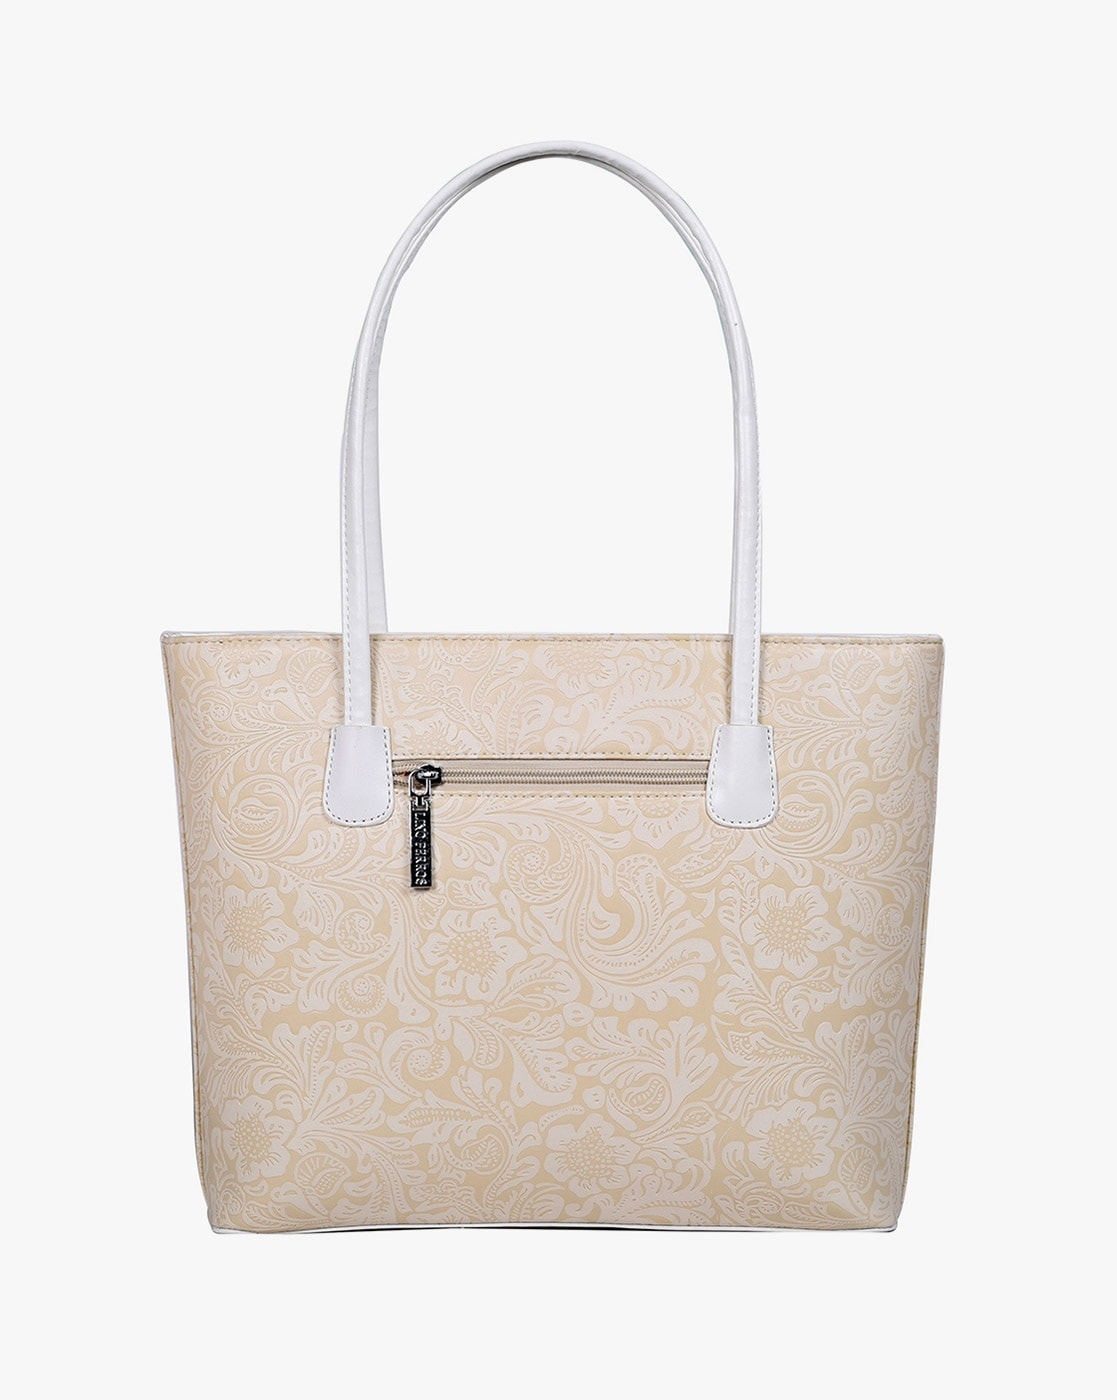 Beige Clear Tote Bag Flower Printed Crossbody Tote with Removable Strap